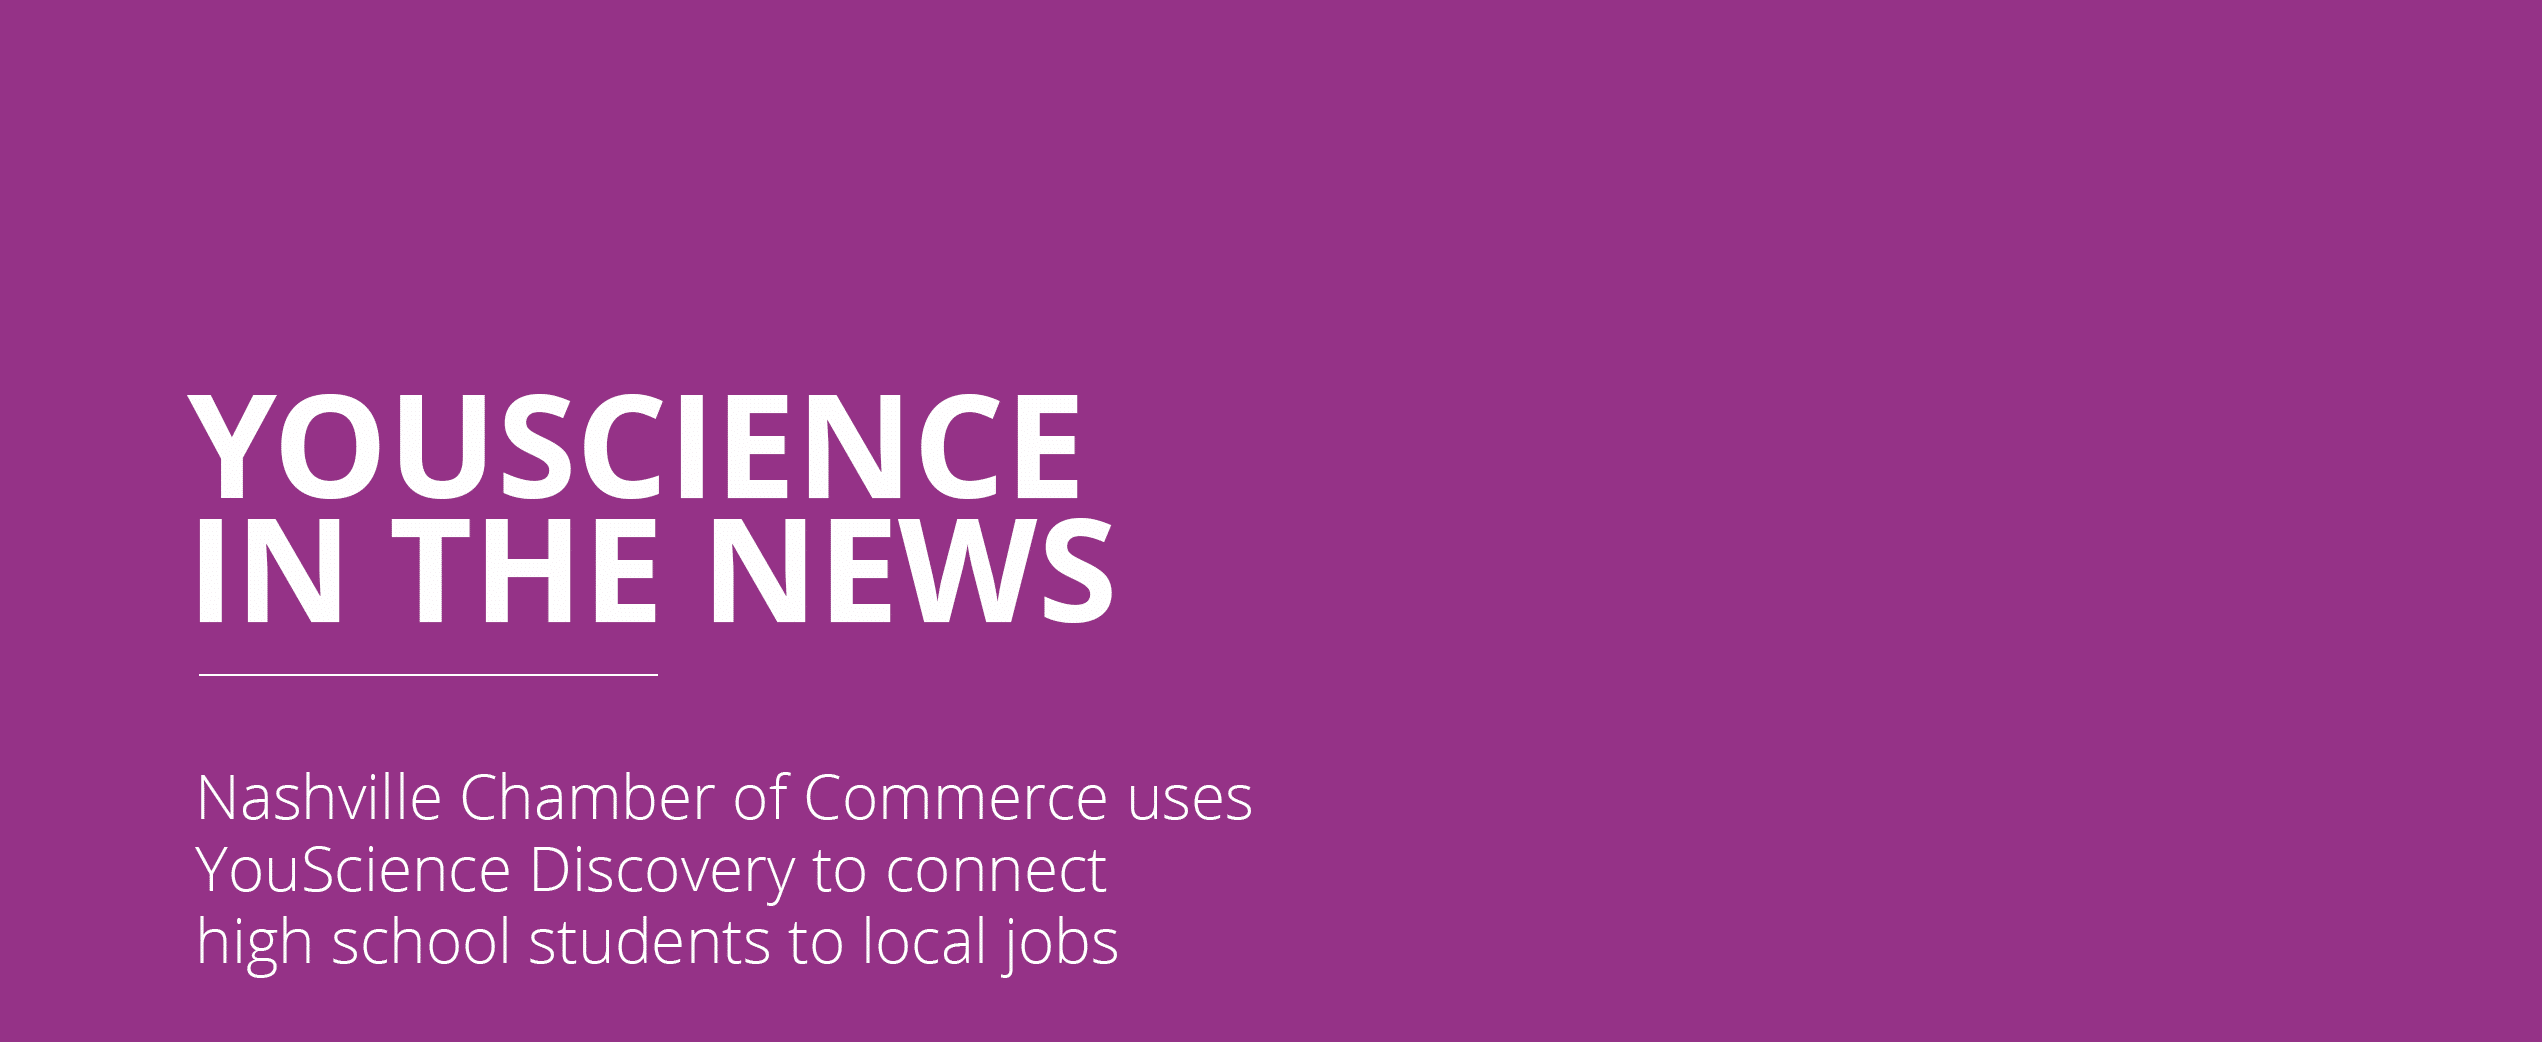 Nashville Chamber of Commerce uses YouScience Discovery to connect high school students to local jobs